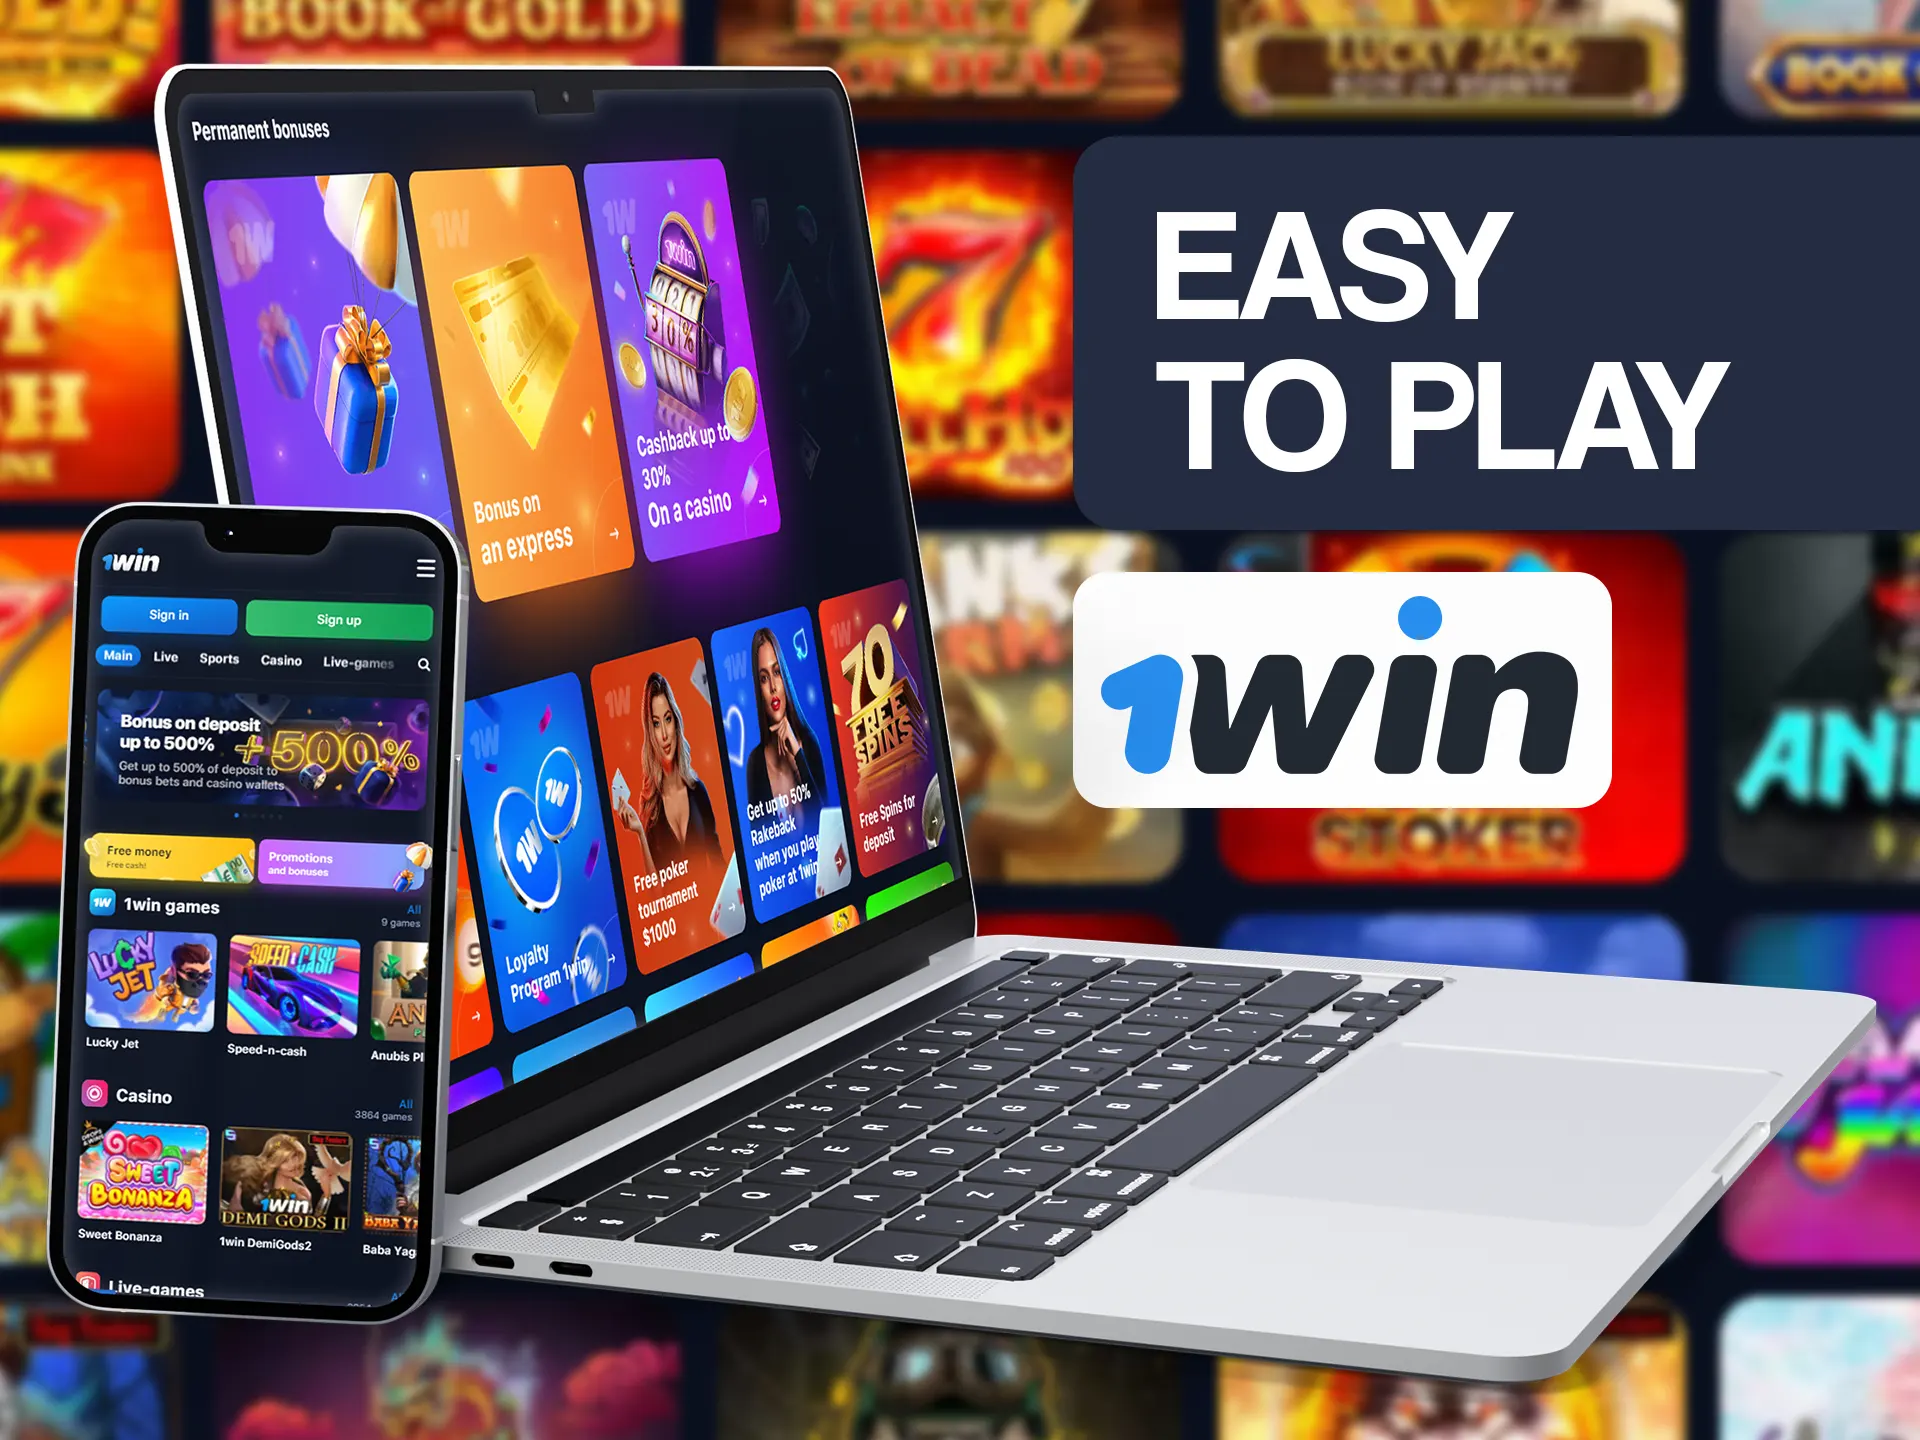 It's easy to use 1win website for gambling.